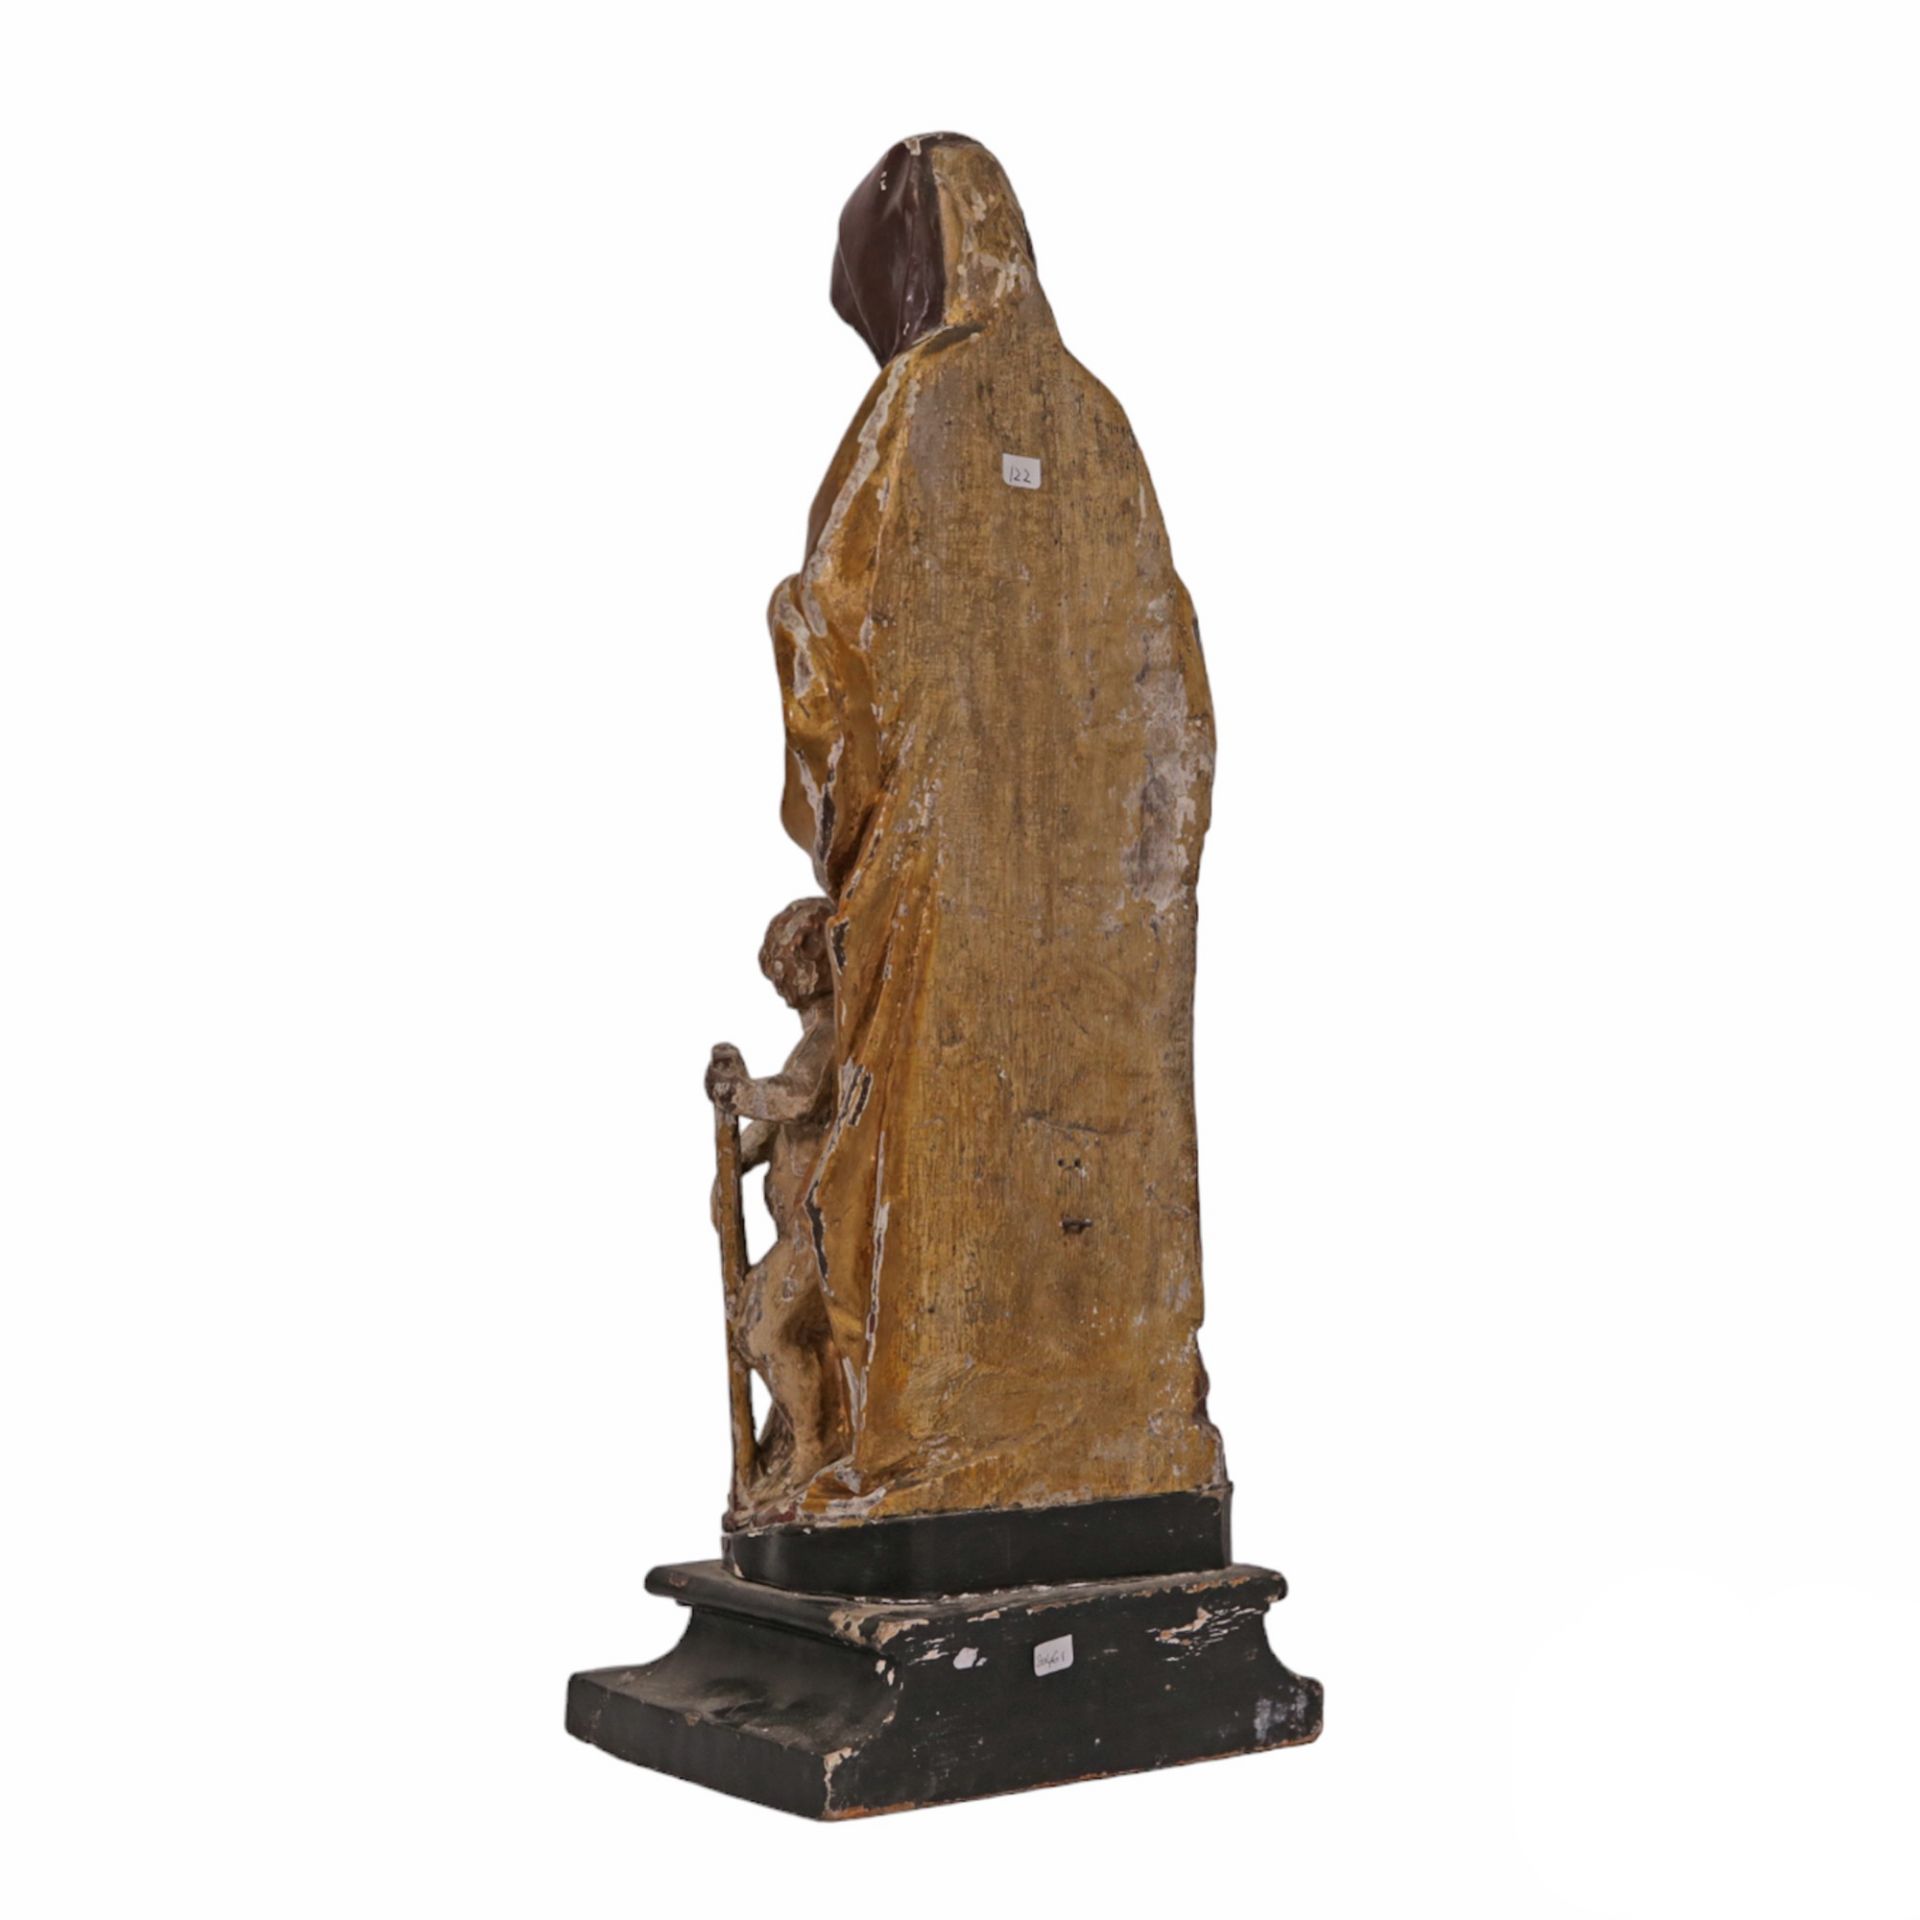 RARE, ANTIQUE, POLYCHROME WOODEN SCULPTURE "SAINT ANNE TRINITI", ON THE BASIS. FRANCE 19th CENTURY. - Image 6 of 13